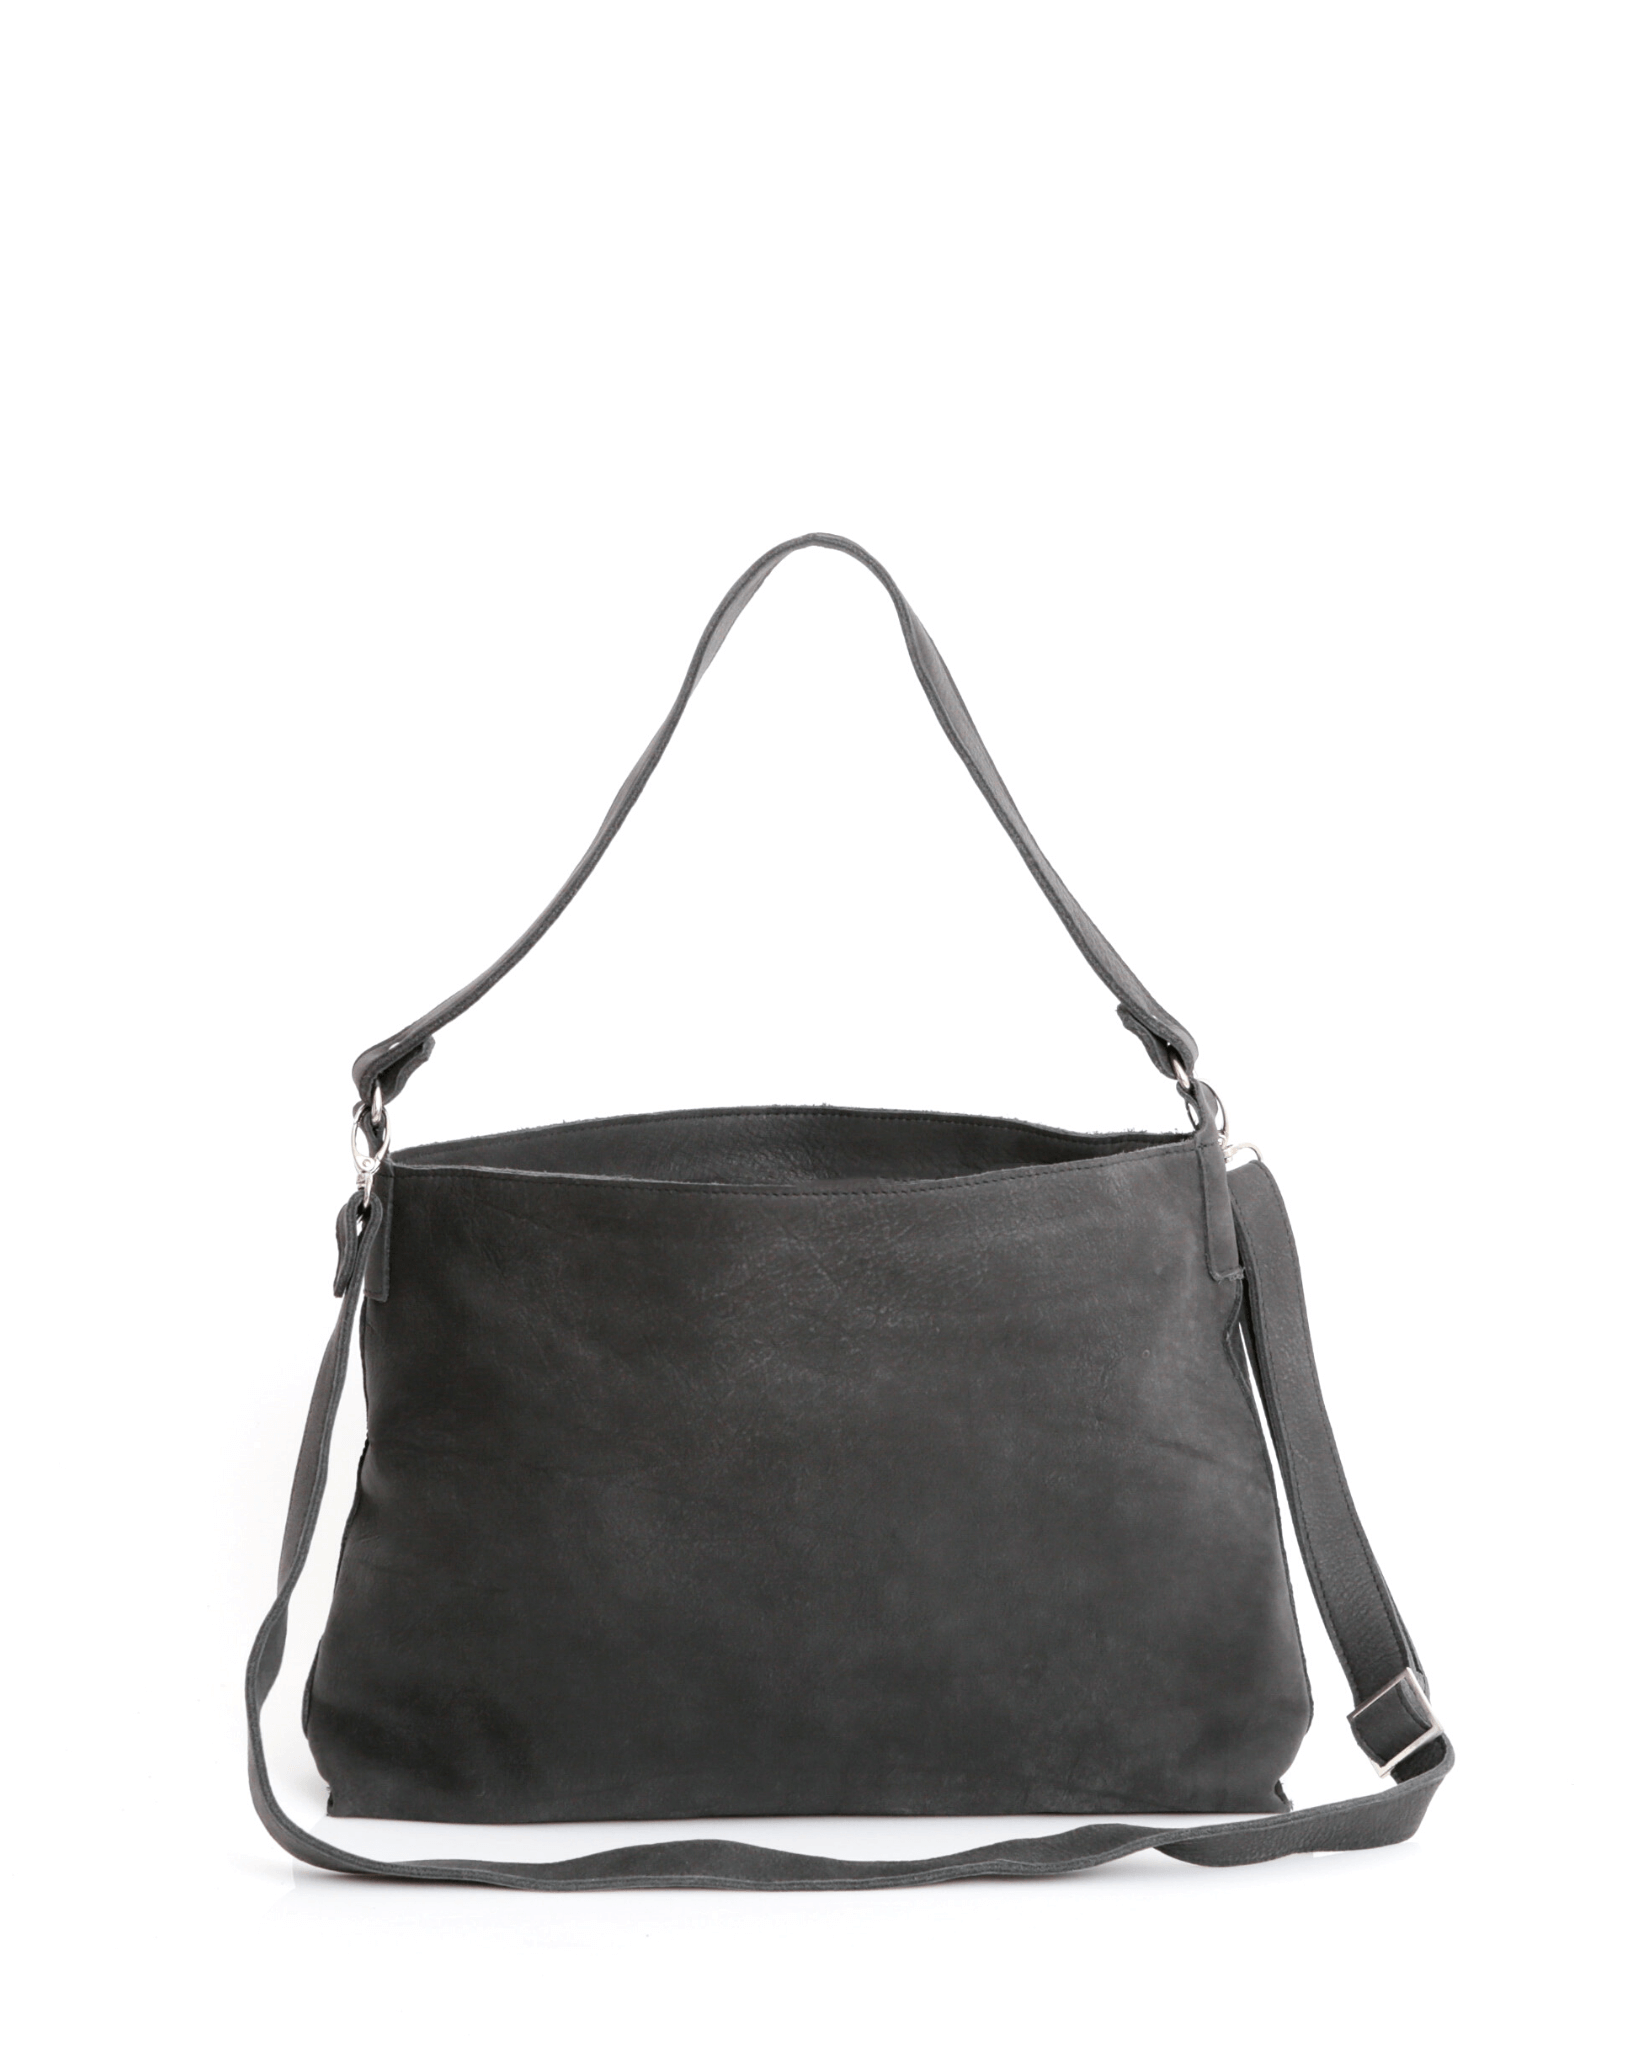 Leather Bag, Black Leather Bag, Leather Tote , Women Leather Bag, Soft Leather Bag, Tote Bag, Women Bag, Large Leather Bag, Laptop Bag Tote